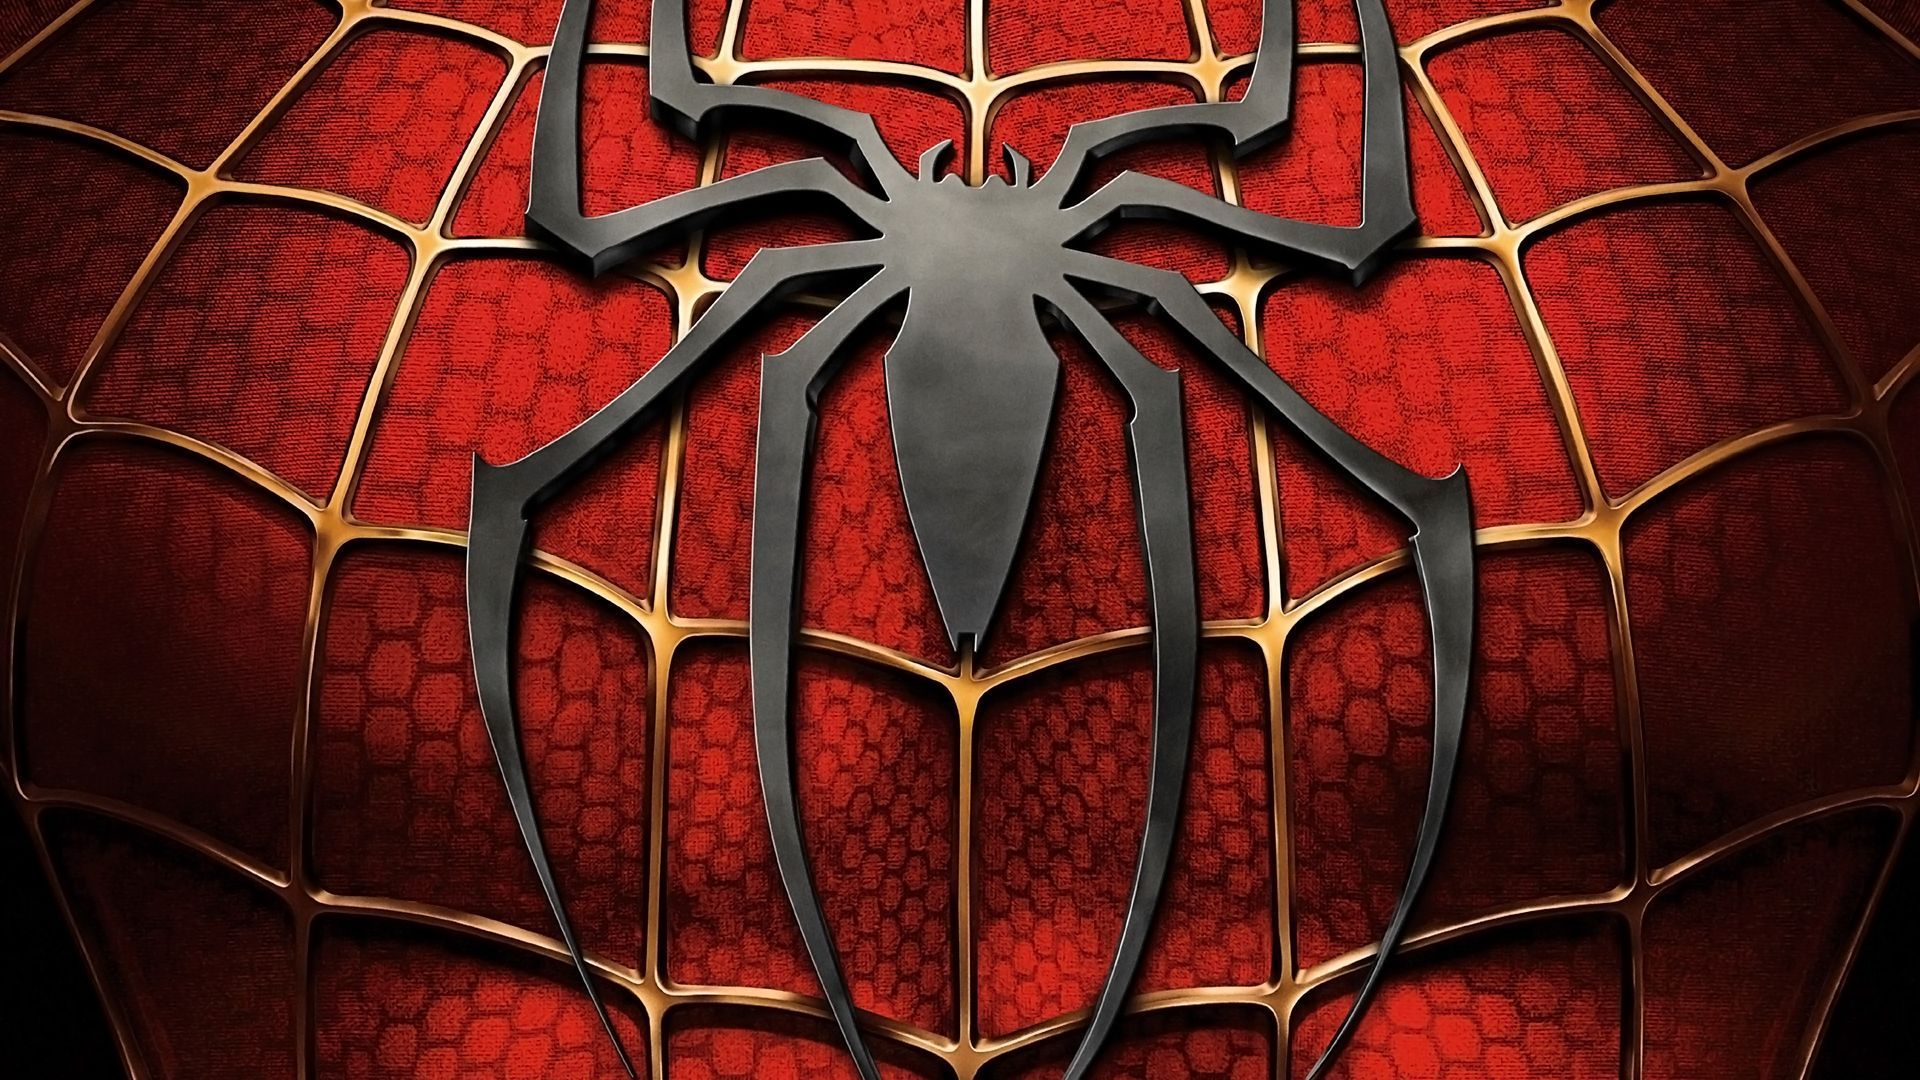 spiderman wallpaper hd,red,spider man,fictional character,symmetry,stained glass